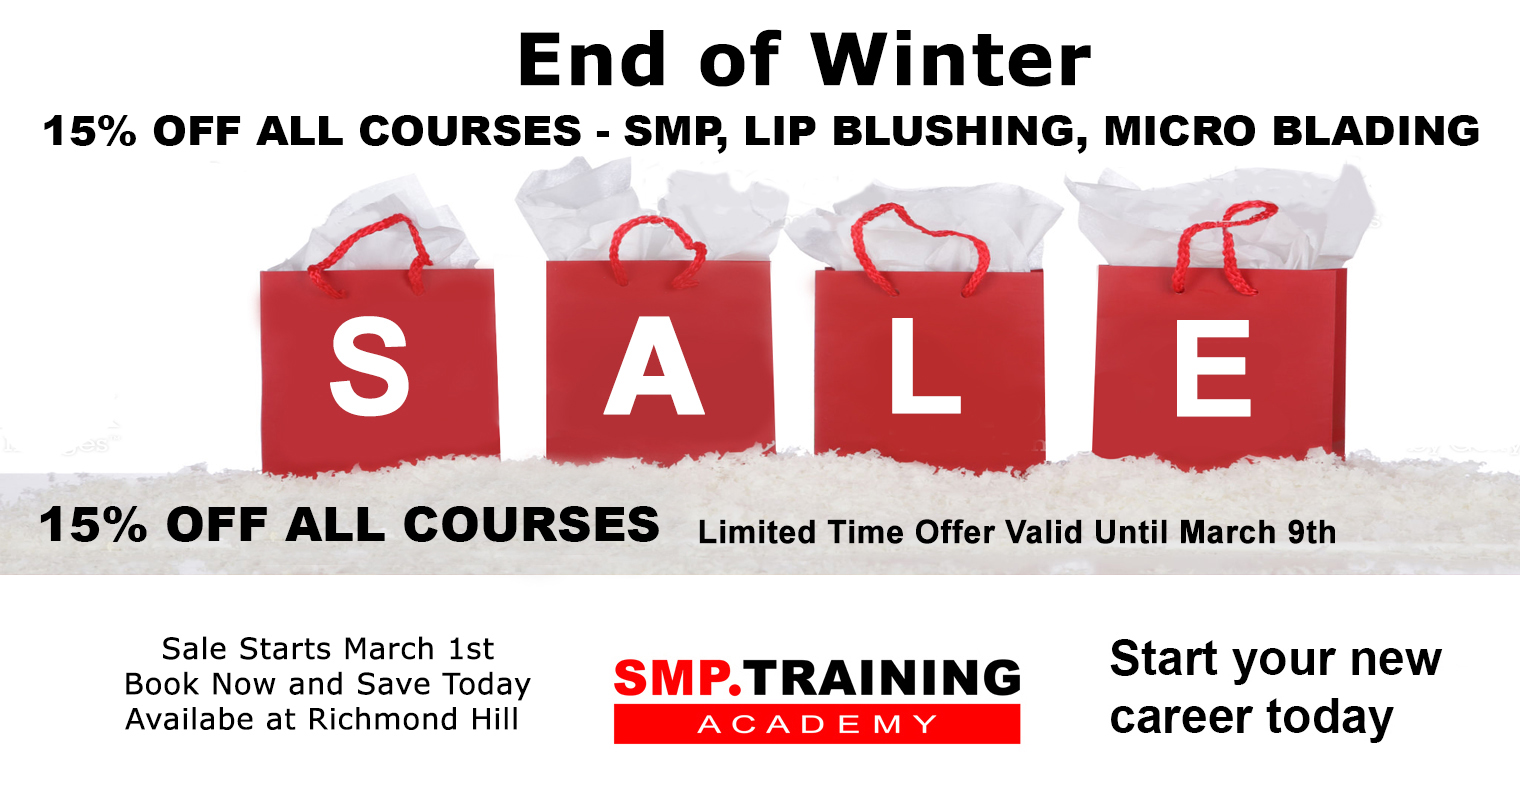 SMP.training-WinterMarch1-9